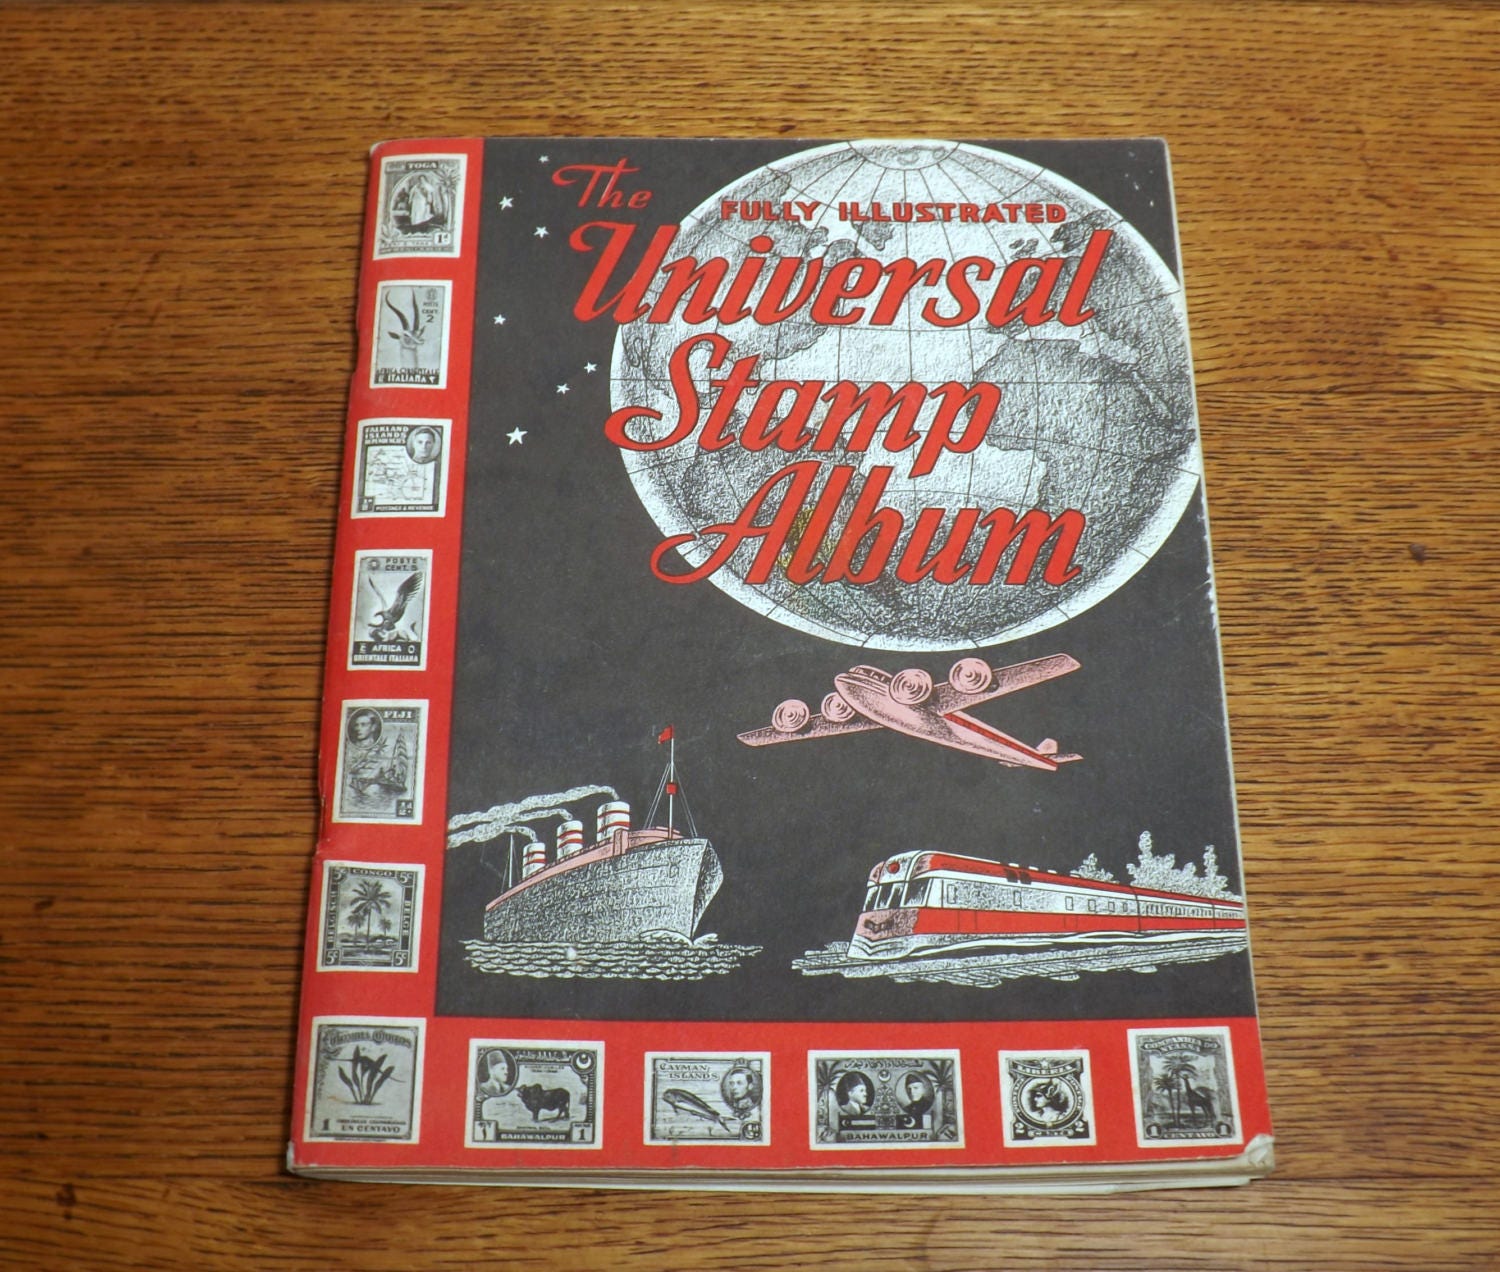 Buy My Stamp Collection +110 stamp: stamp albums for collectors